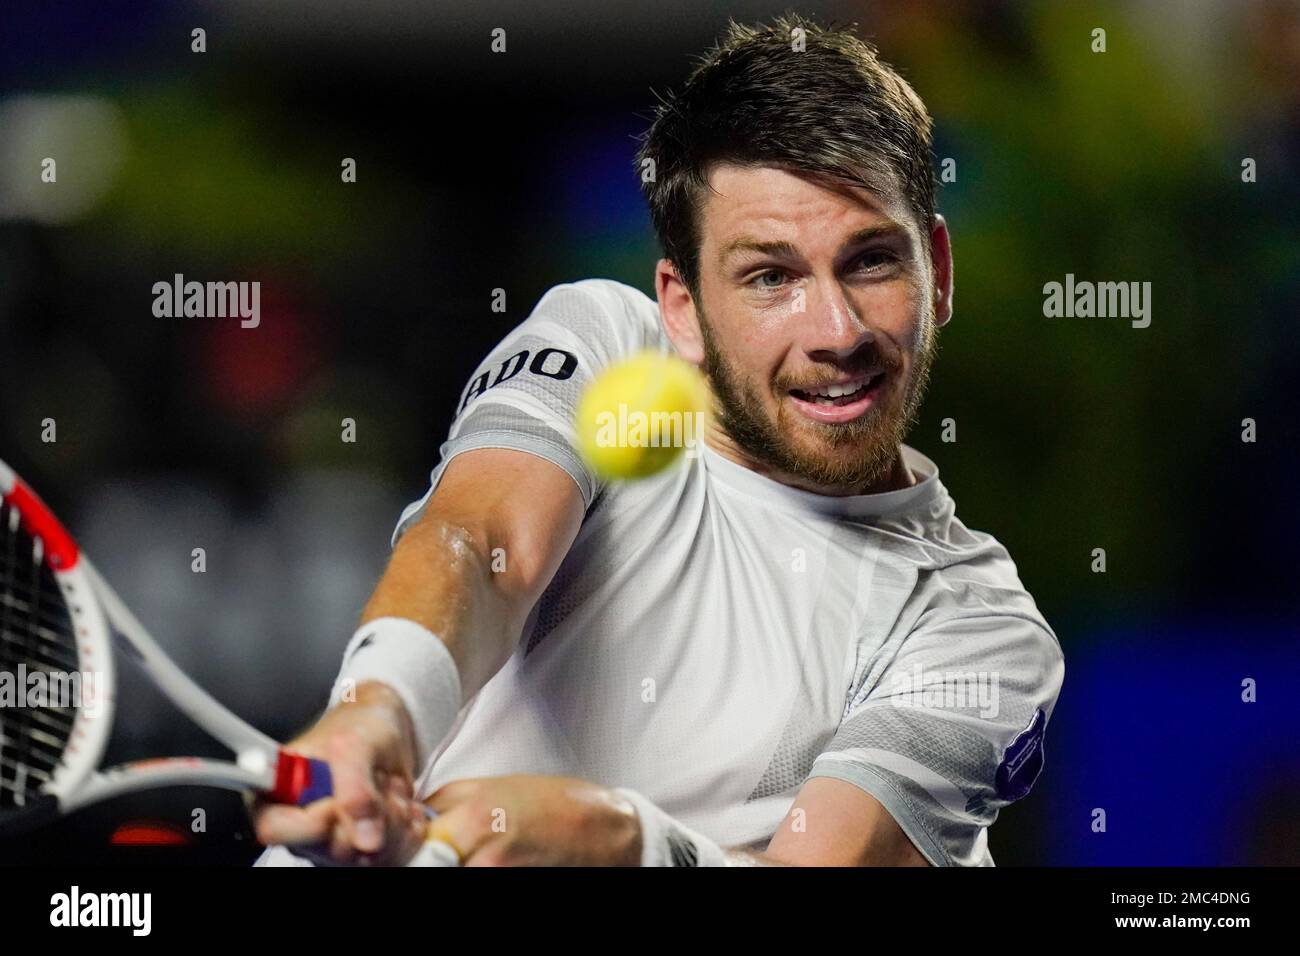 Britains Cameron Norrie returns a ball during his semifinal match against Greeces Stefanos Tsitsipas at the Mexican Open tennis tournament in Acapulco, Mexico, Friday, Feb